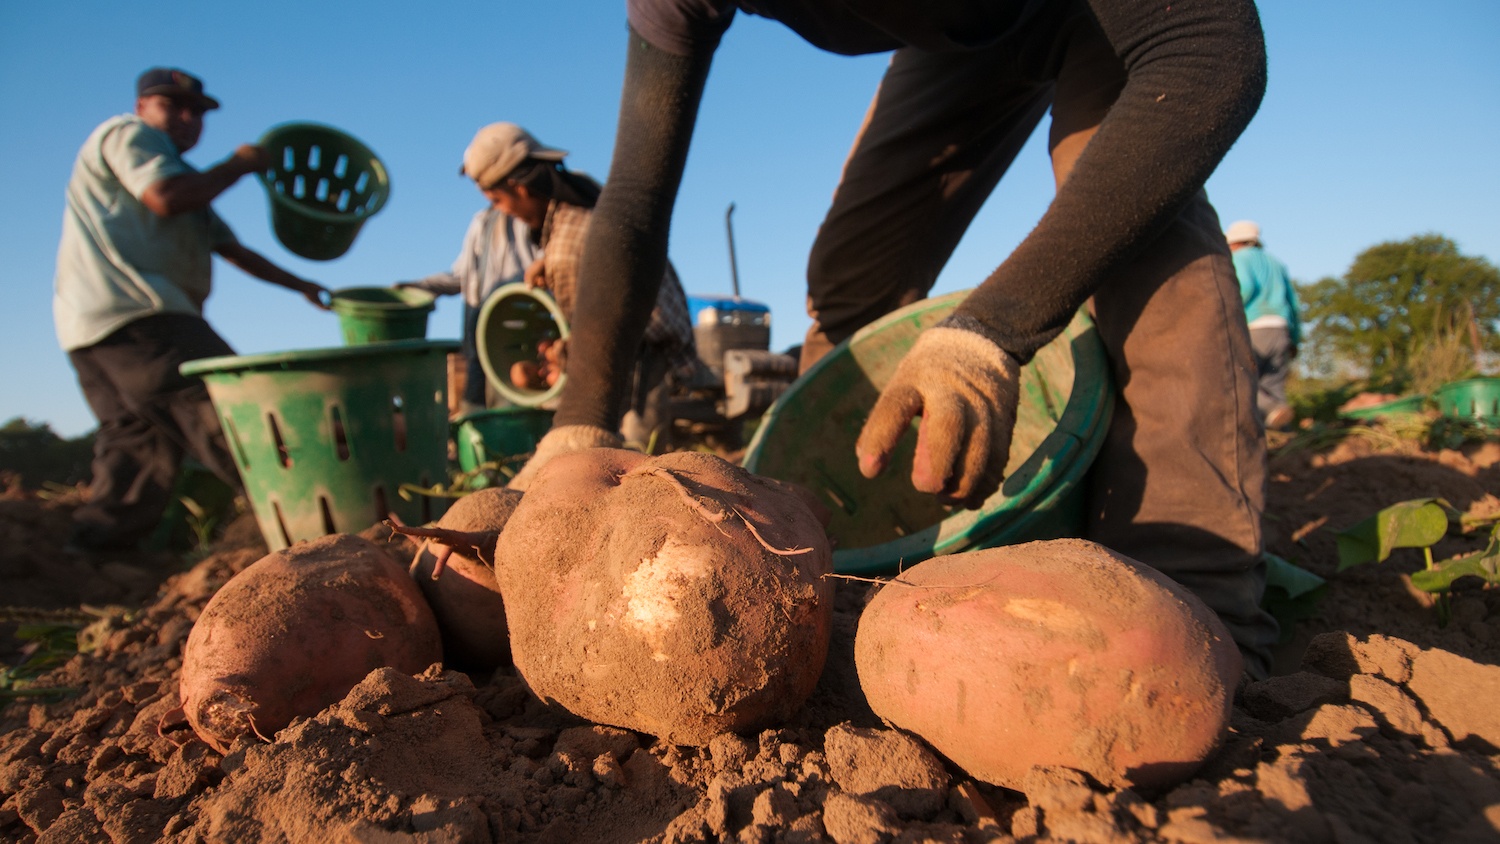 Migrant workers, delicately lift large sweet potatoes as they pick and sort according to size, at Kirby Farms in Mechanicsville, VA on Sep. 20, 2013.